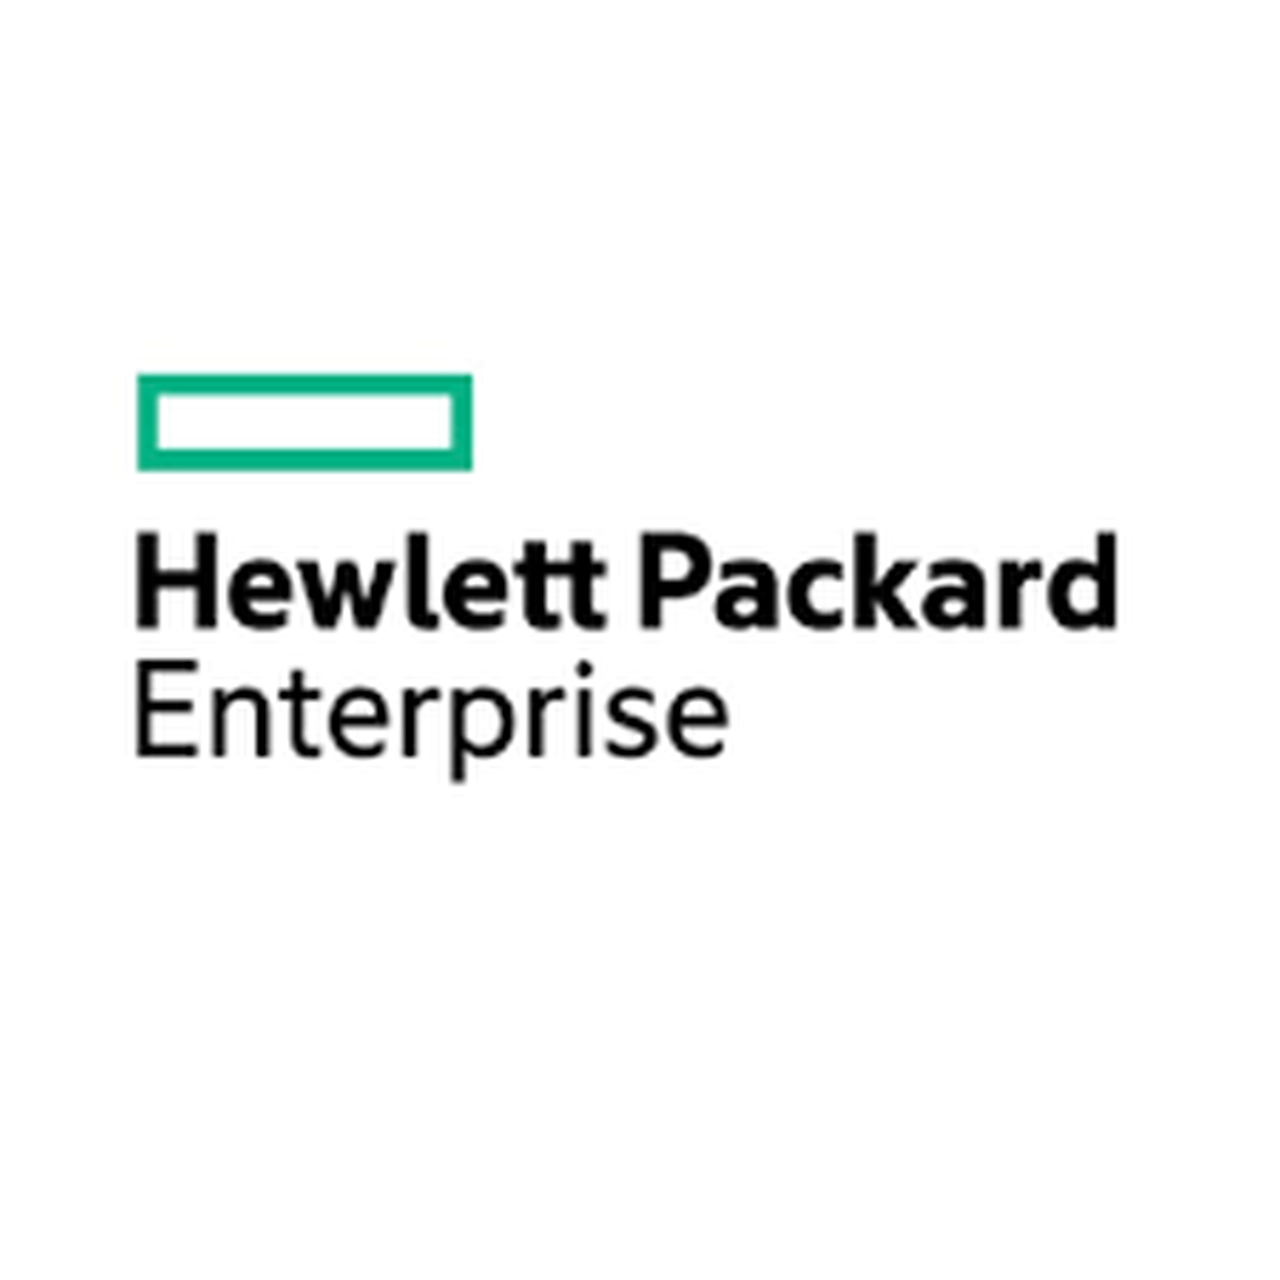 HPE SAP HANA Scale-out Standby Node Factory integrated